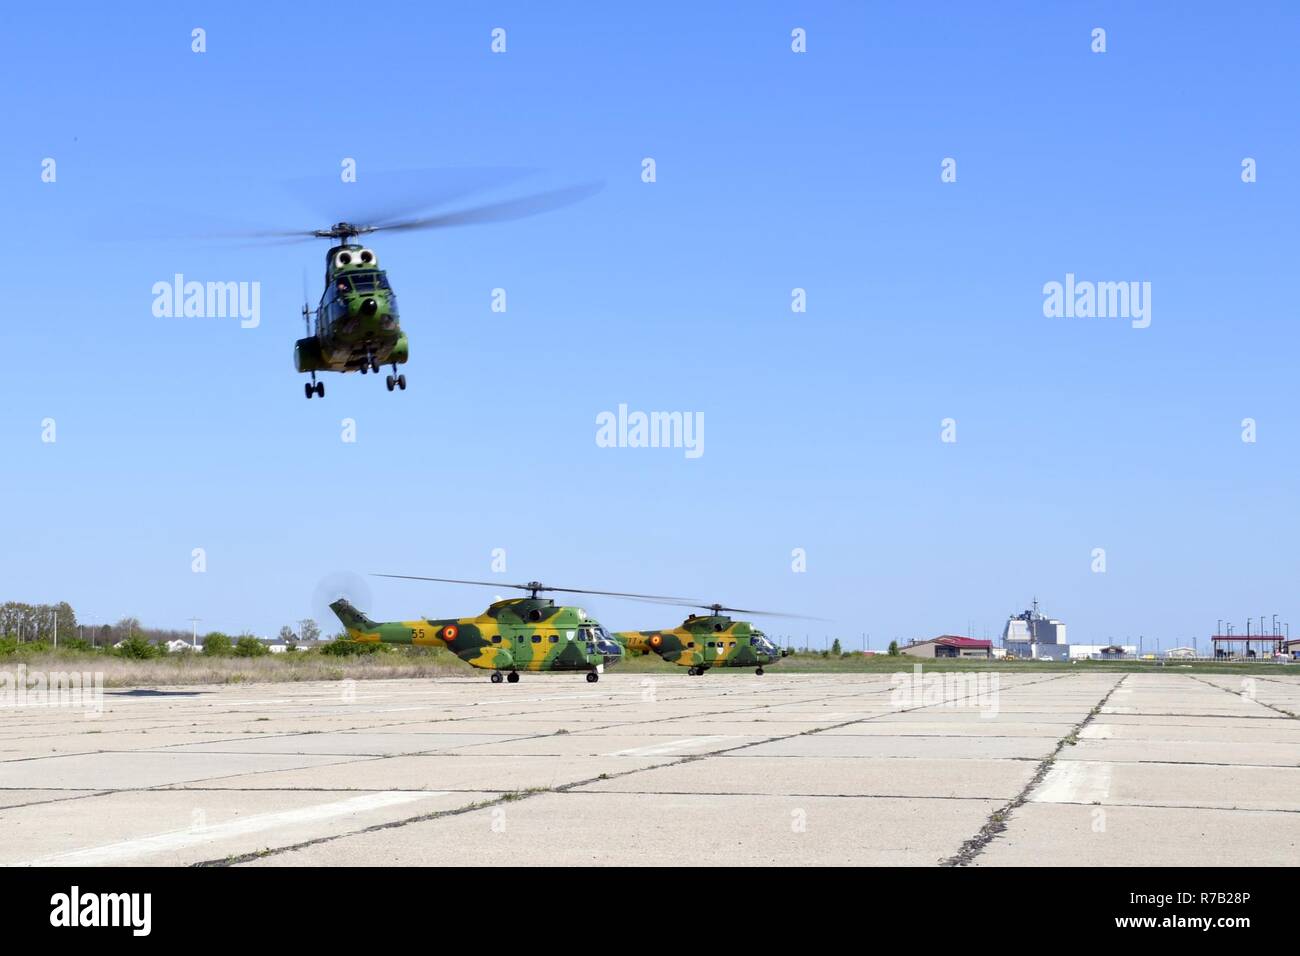 NAVAL SUPPORT FACILITY DEVESELU, Romania (April 11, 2017) Three IAR-330 Puma medium transport helipcopters take off from Naval Support Facility Deveselu carrying Commander, U.S. Air Forces in Europe and U.S. Air Forces in Africa, Commander, Allied Air Command, and Director, Joint Air Power Competency Centre, Kalkar, Germany Gen. Tod D. Wolters, Lt. Gen. Laurian Anastasof, Chief of Romanian Air Force, Brig. Gen. Dieter E. Bareihs, U.S. Air Force Director of Plans, and staff. NSF Deveselu plays a key role in ballistic missile defense in Eastern Europe. The installation's operations enable the re Stock Photo